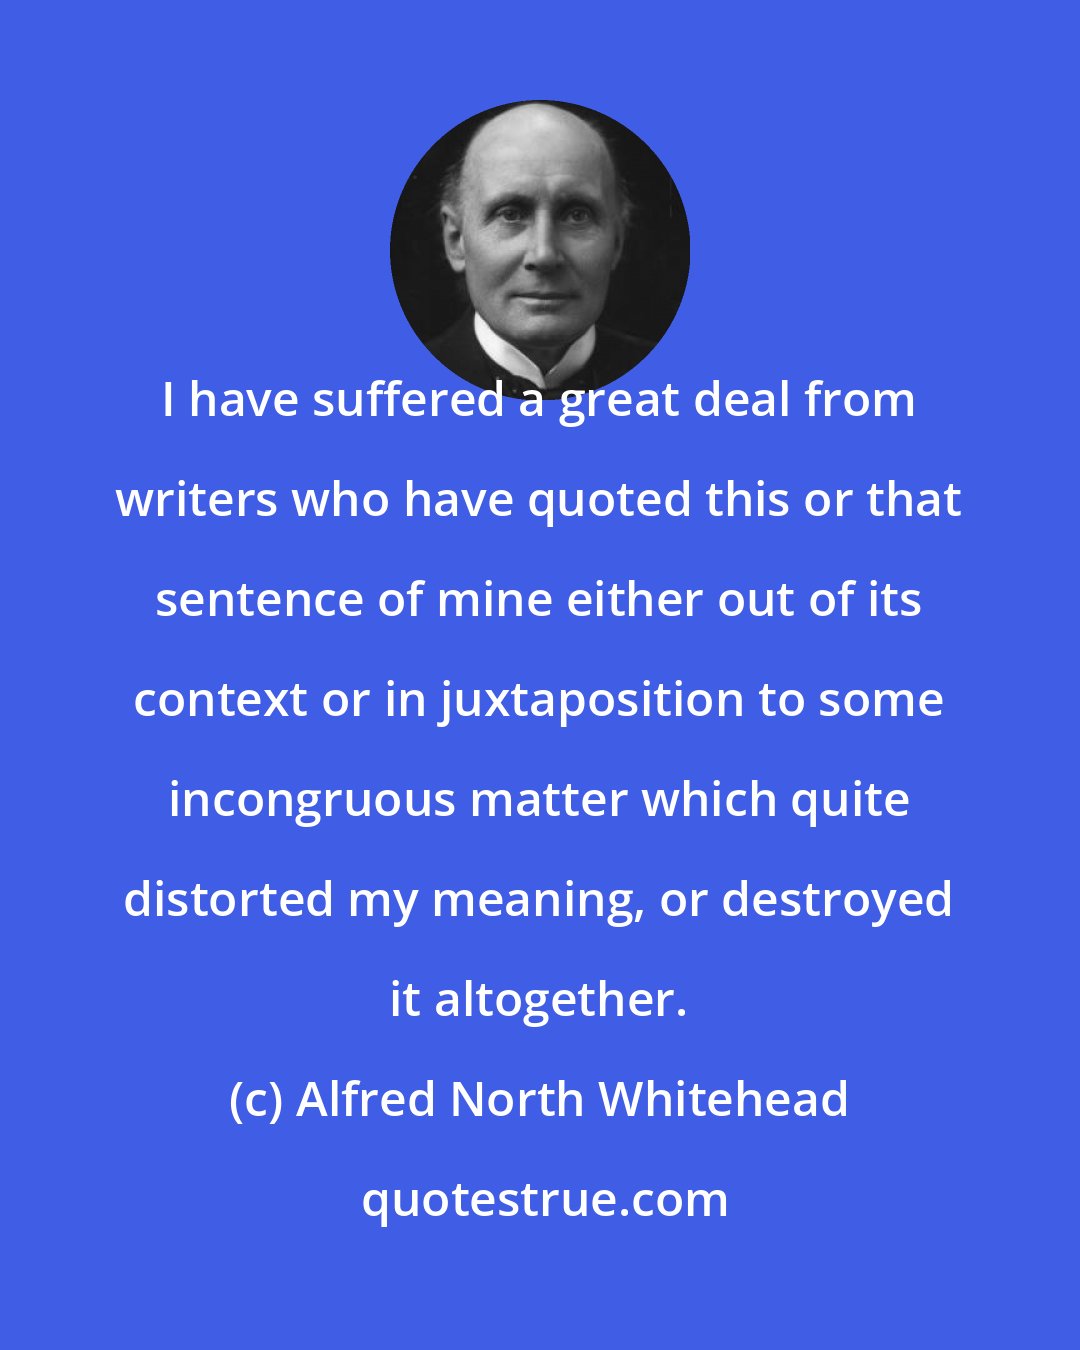 Alfred North Whitehead: I have suffered a great deal from writers who have quoted this or that sentence of mine either out of its context or in juxtaposition to some incongruous matter which quite distorted my meaning, or destroyed it altogether.